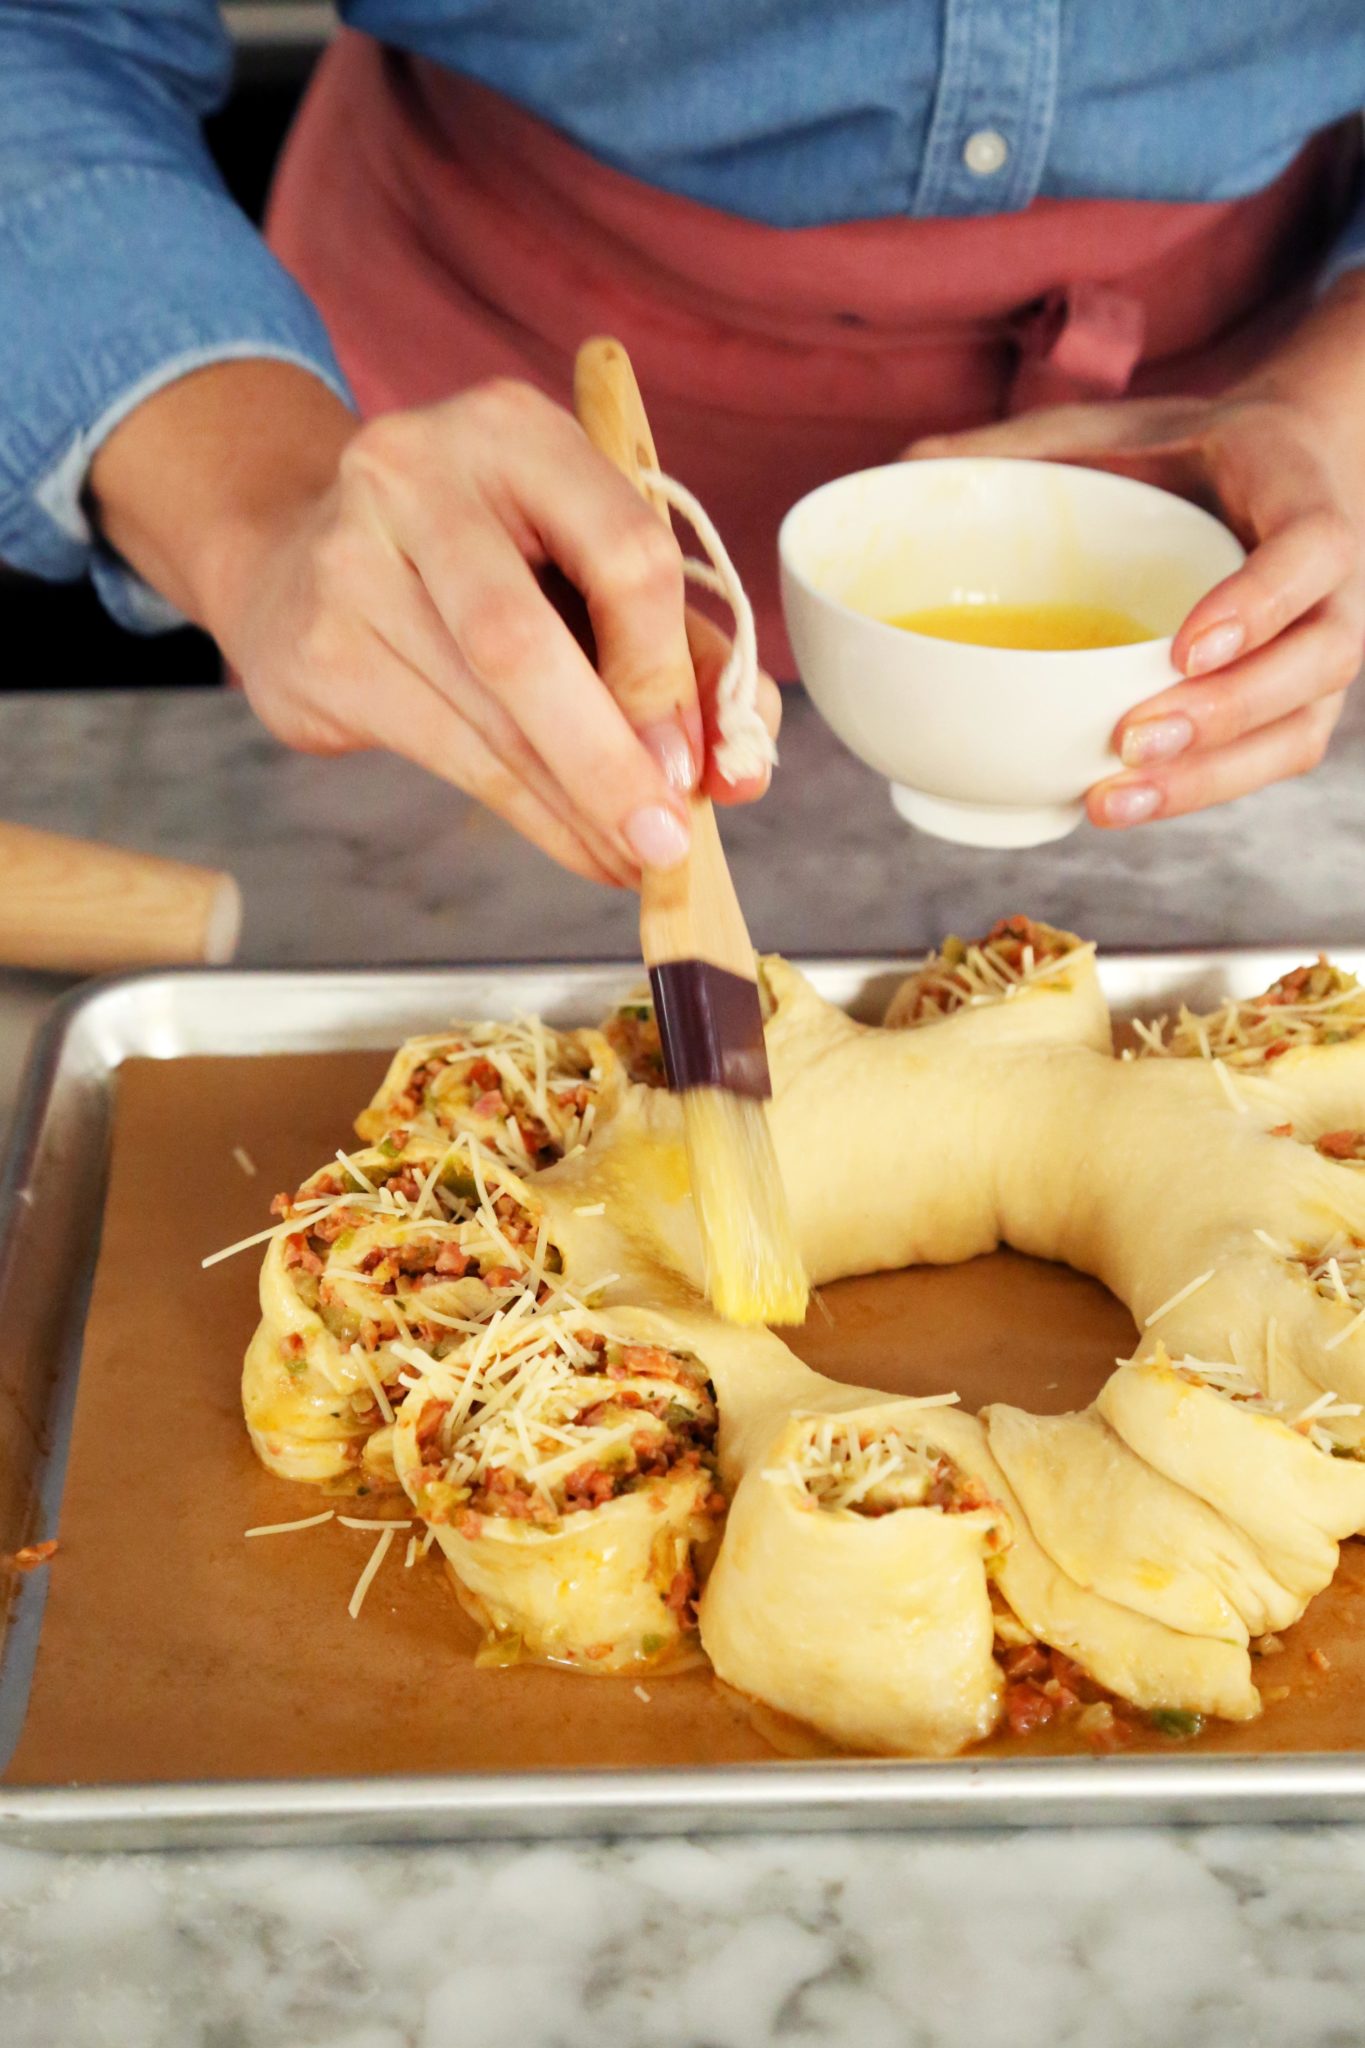 PHOTO: A savory King cake with sausage and cheese gets an egg wash before baking.